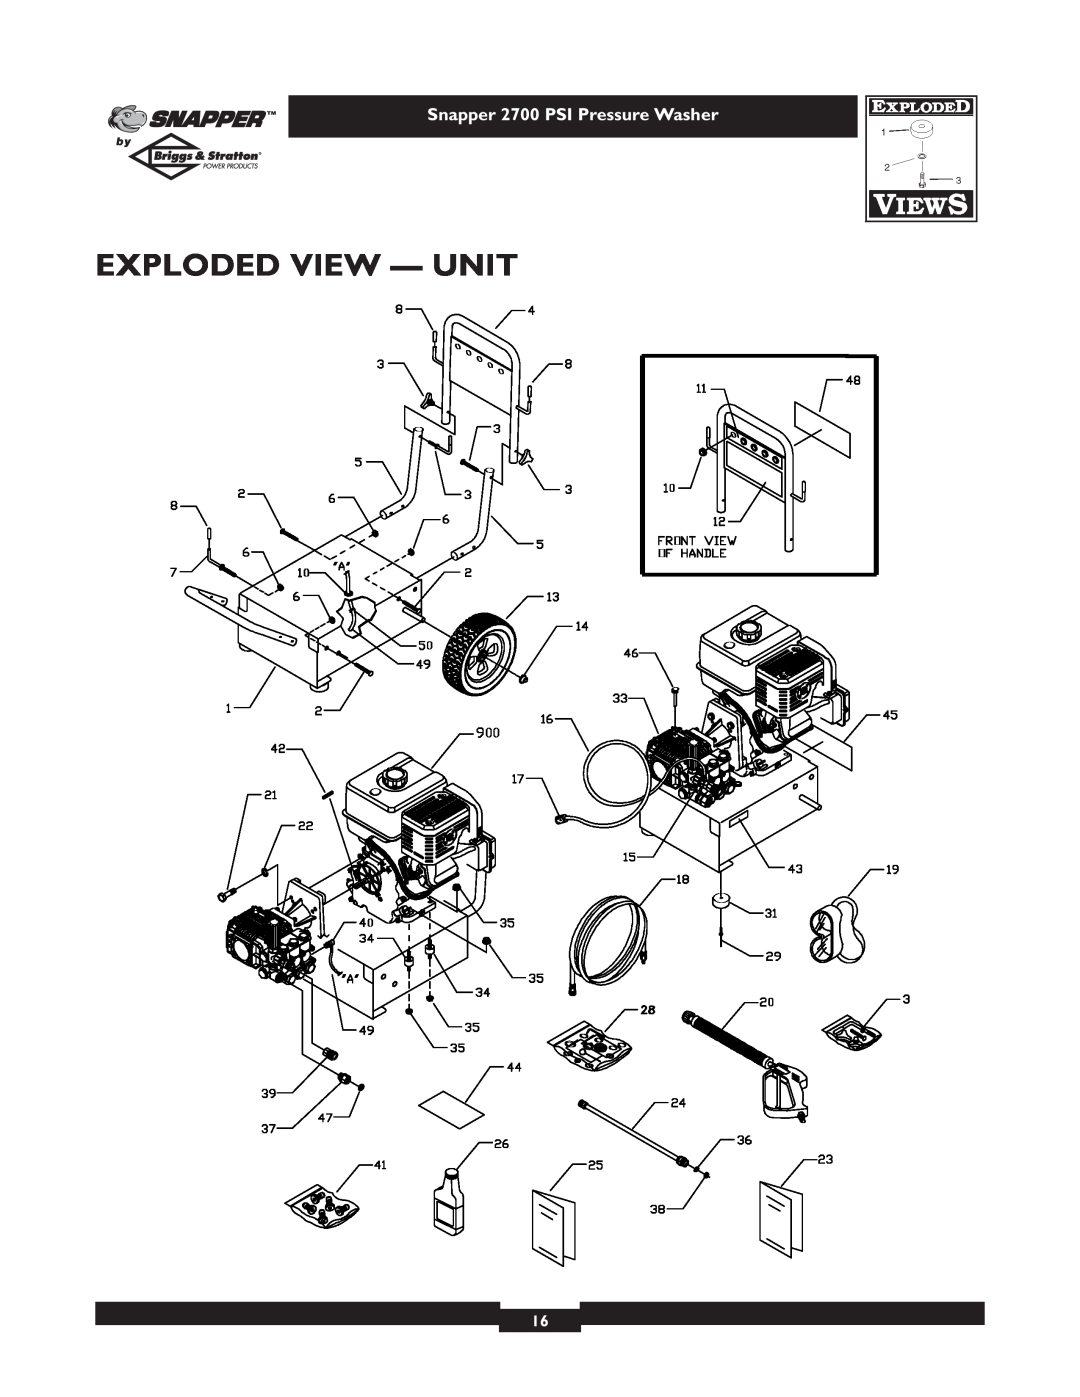 Snapper 1661-0 owner manual Exploded View - Unit, Snapper 2700 PSI Pressure Washer 